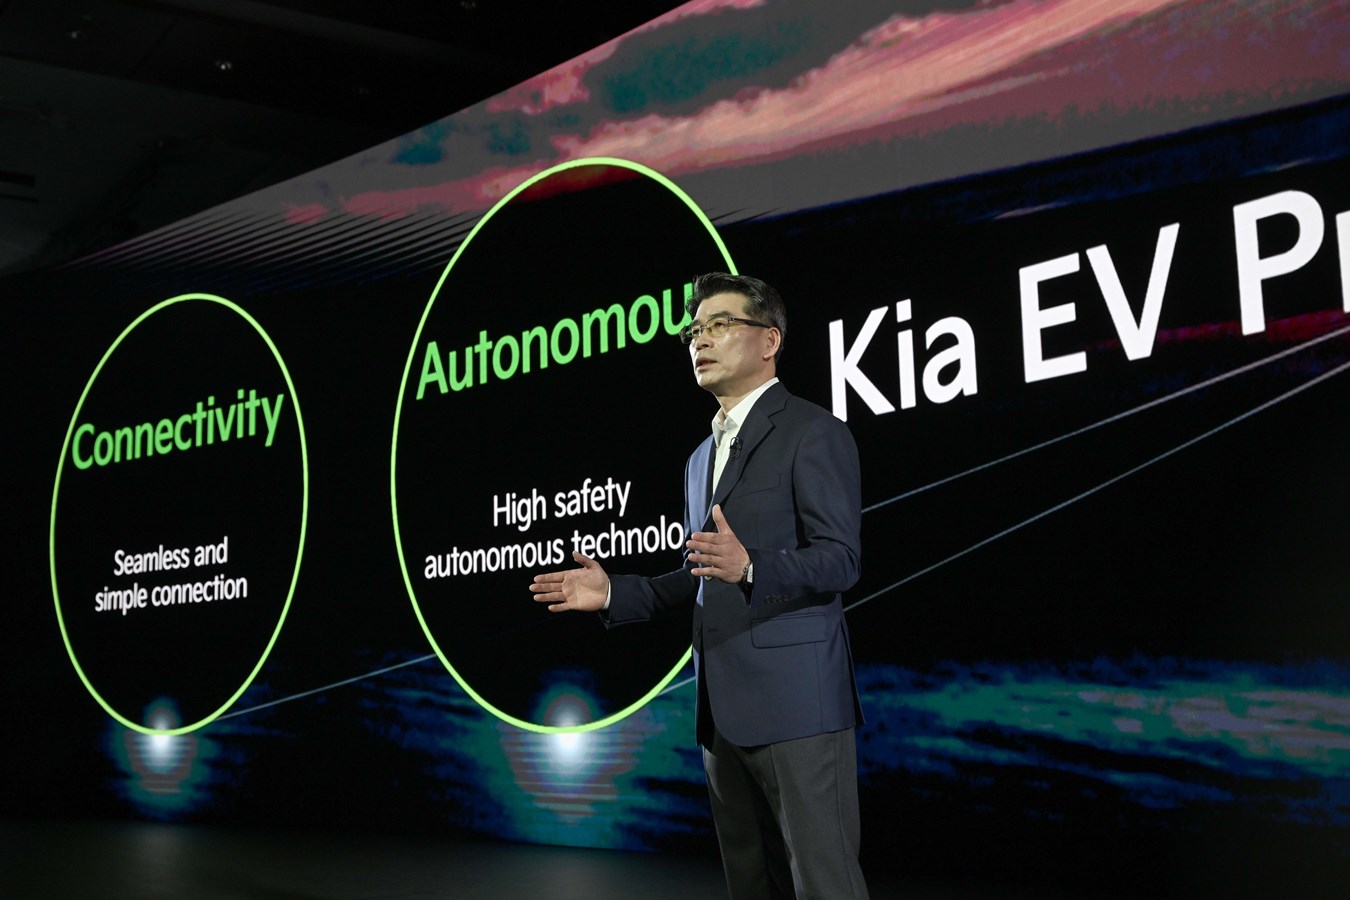 Kia CEO Investor Day : Kia accelerates EV transition with target of  1.6 million EV sales by 2030